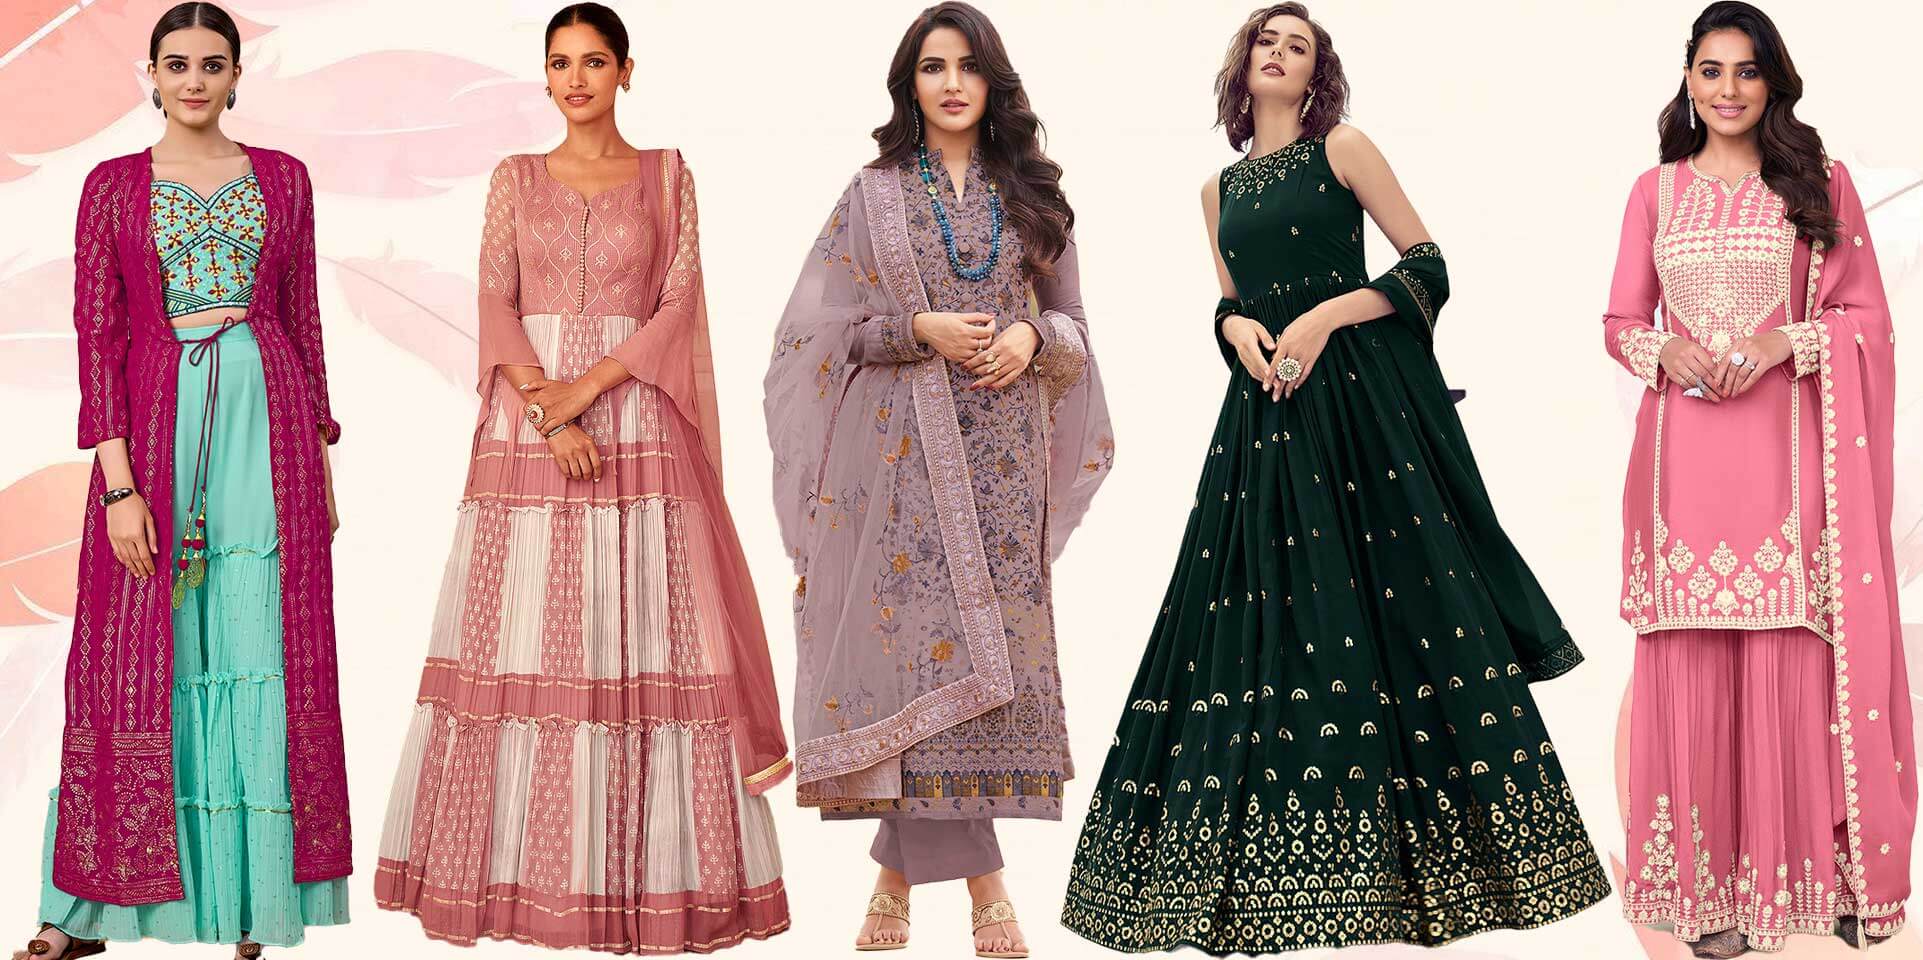 https://www.hatkay.com/cdn/shop/articles/Best-Indian-Clothes-shopping-guide-in-the-USA.jpg?v=1673871218